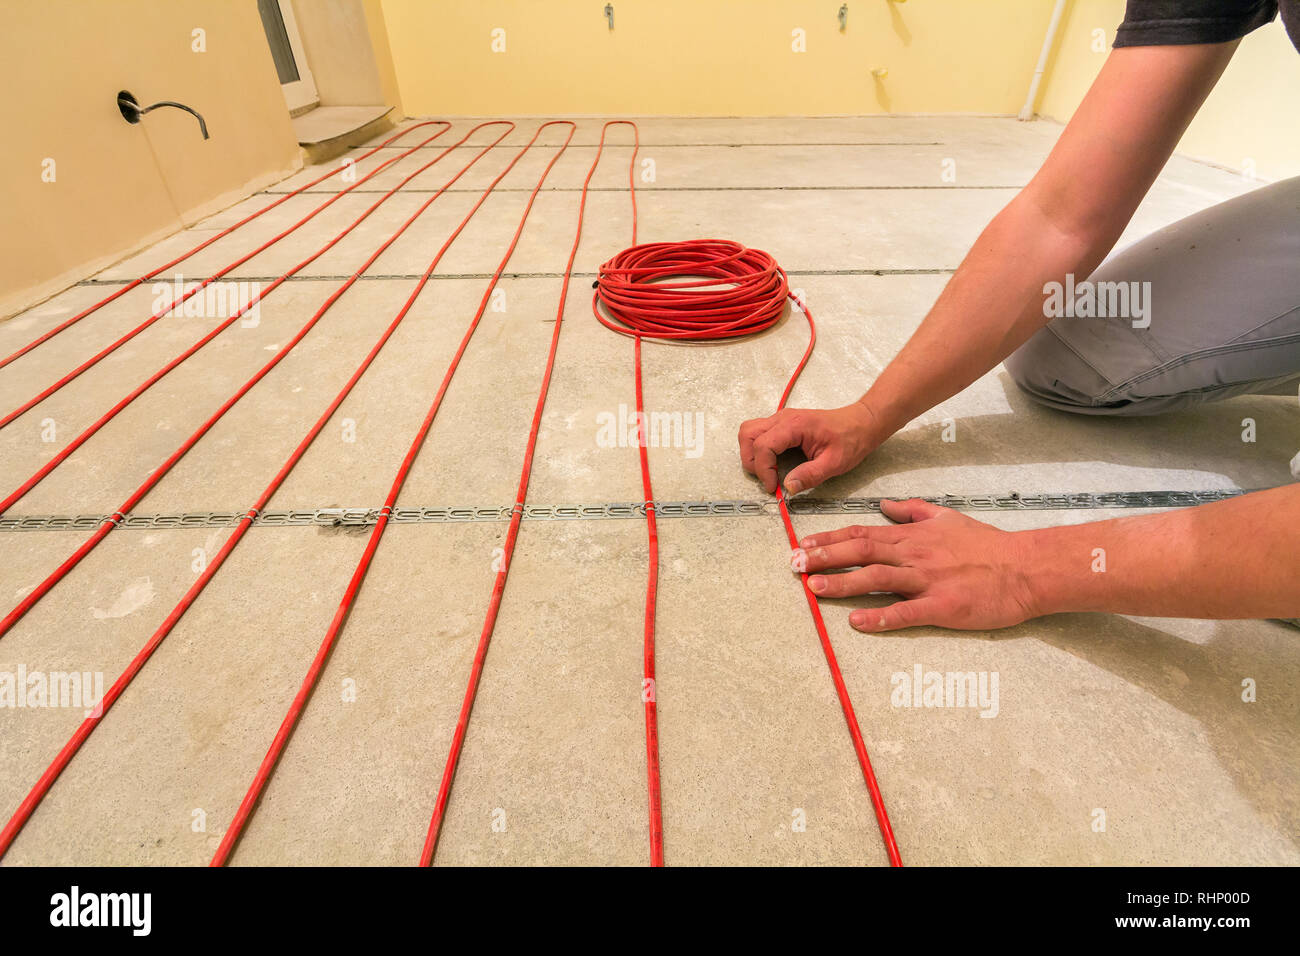 Electrician Installing Heating Red Electrical Cable Wire On Cement